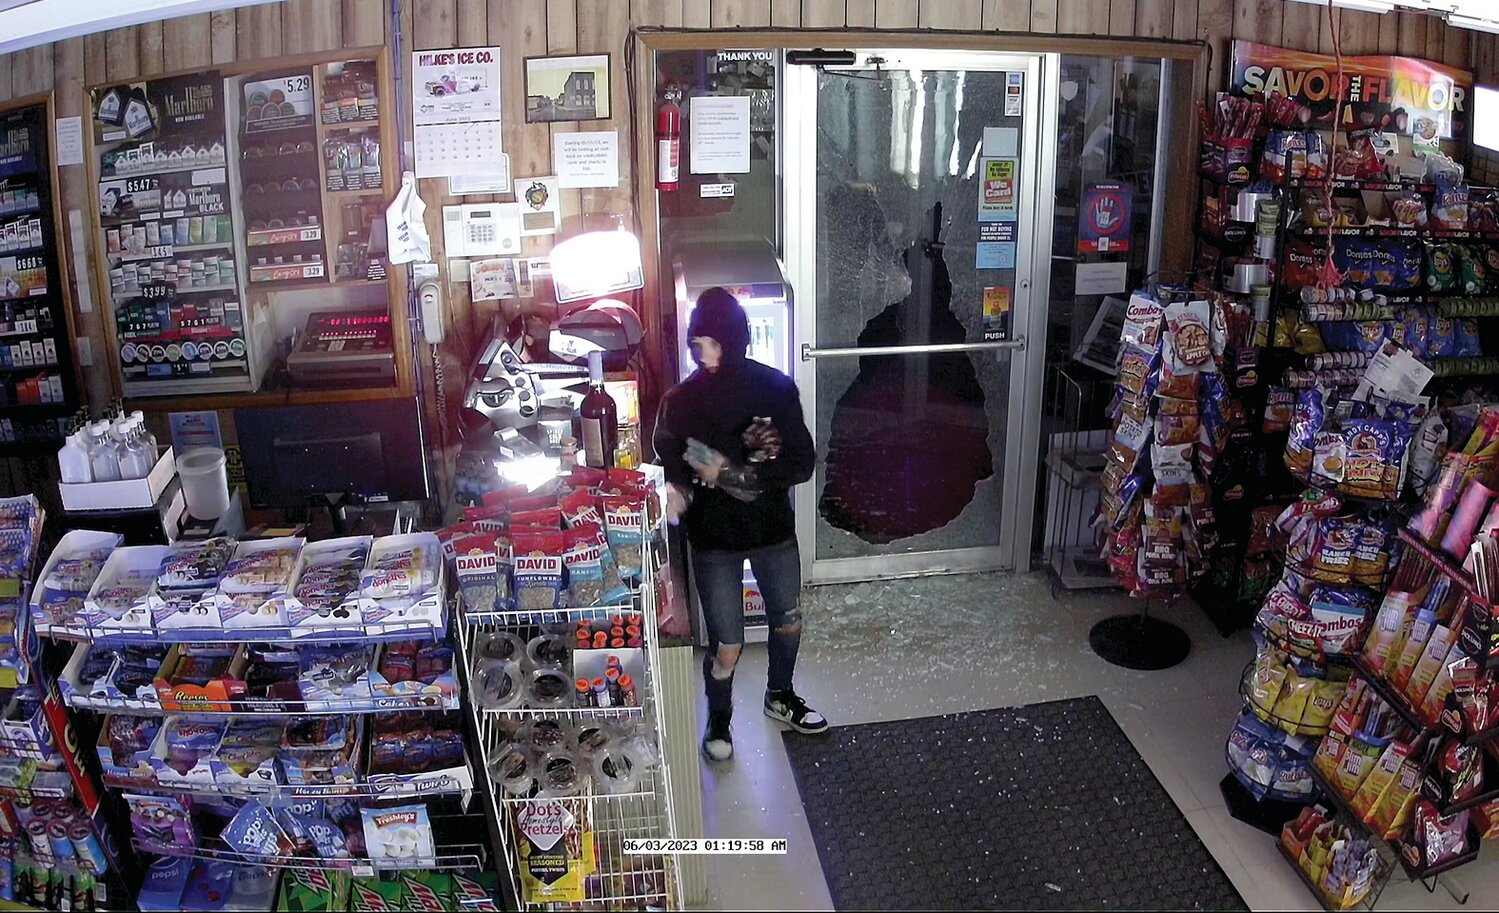 Surveillance video captured two individuals as they broke into Jerry’s Stop & Go early Saturday morning. Osage County Sheriff Mike Bonham is investigating the break-in and asks the public for help in identifying these two people. Anyone with information on the break-ins is encouraged to contact Sgt. Ricky Jarvis at 573-897-3927.